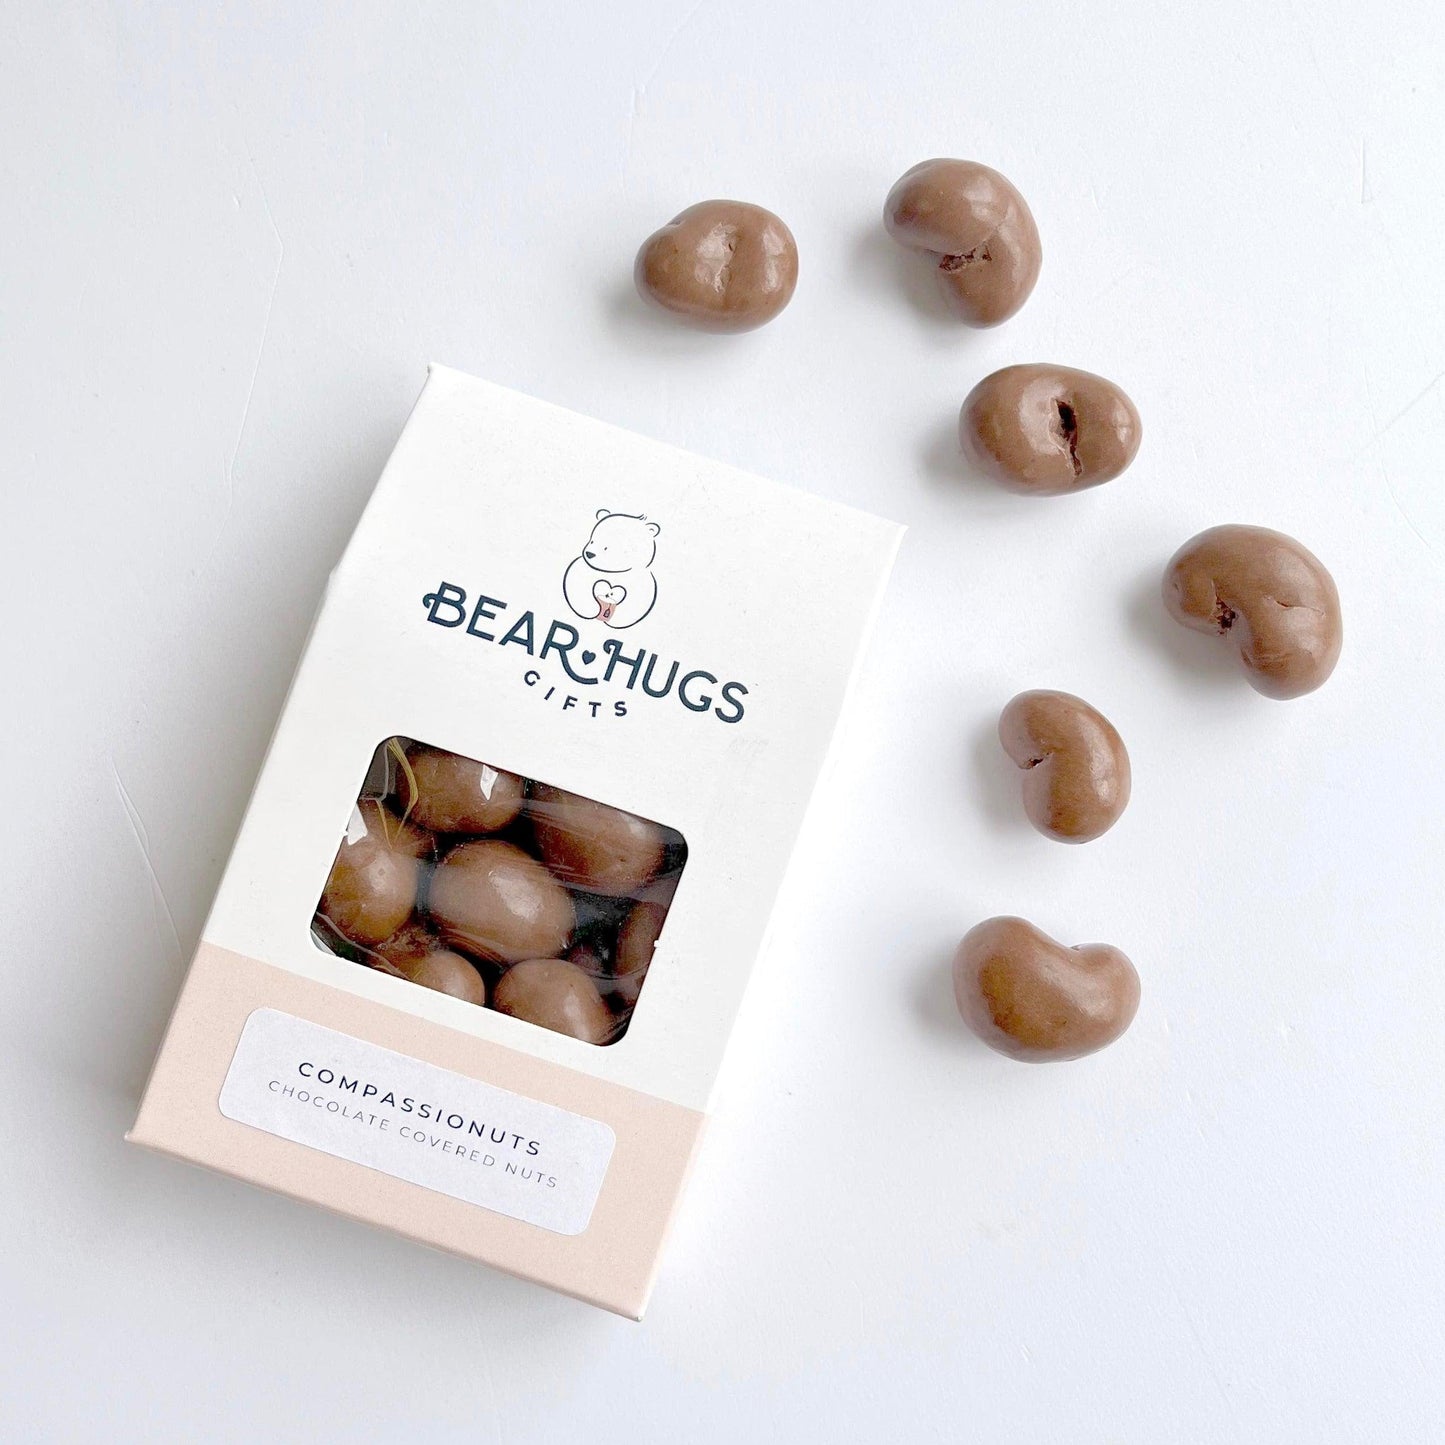 Compassionuts: Chocolate Covered Nuts - BearHugs - Thinking Of You Gifts